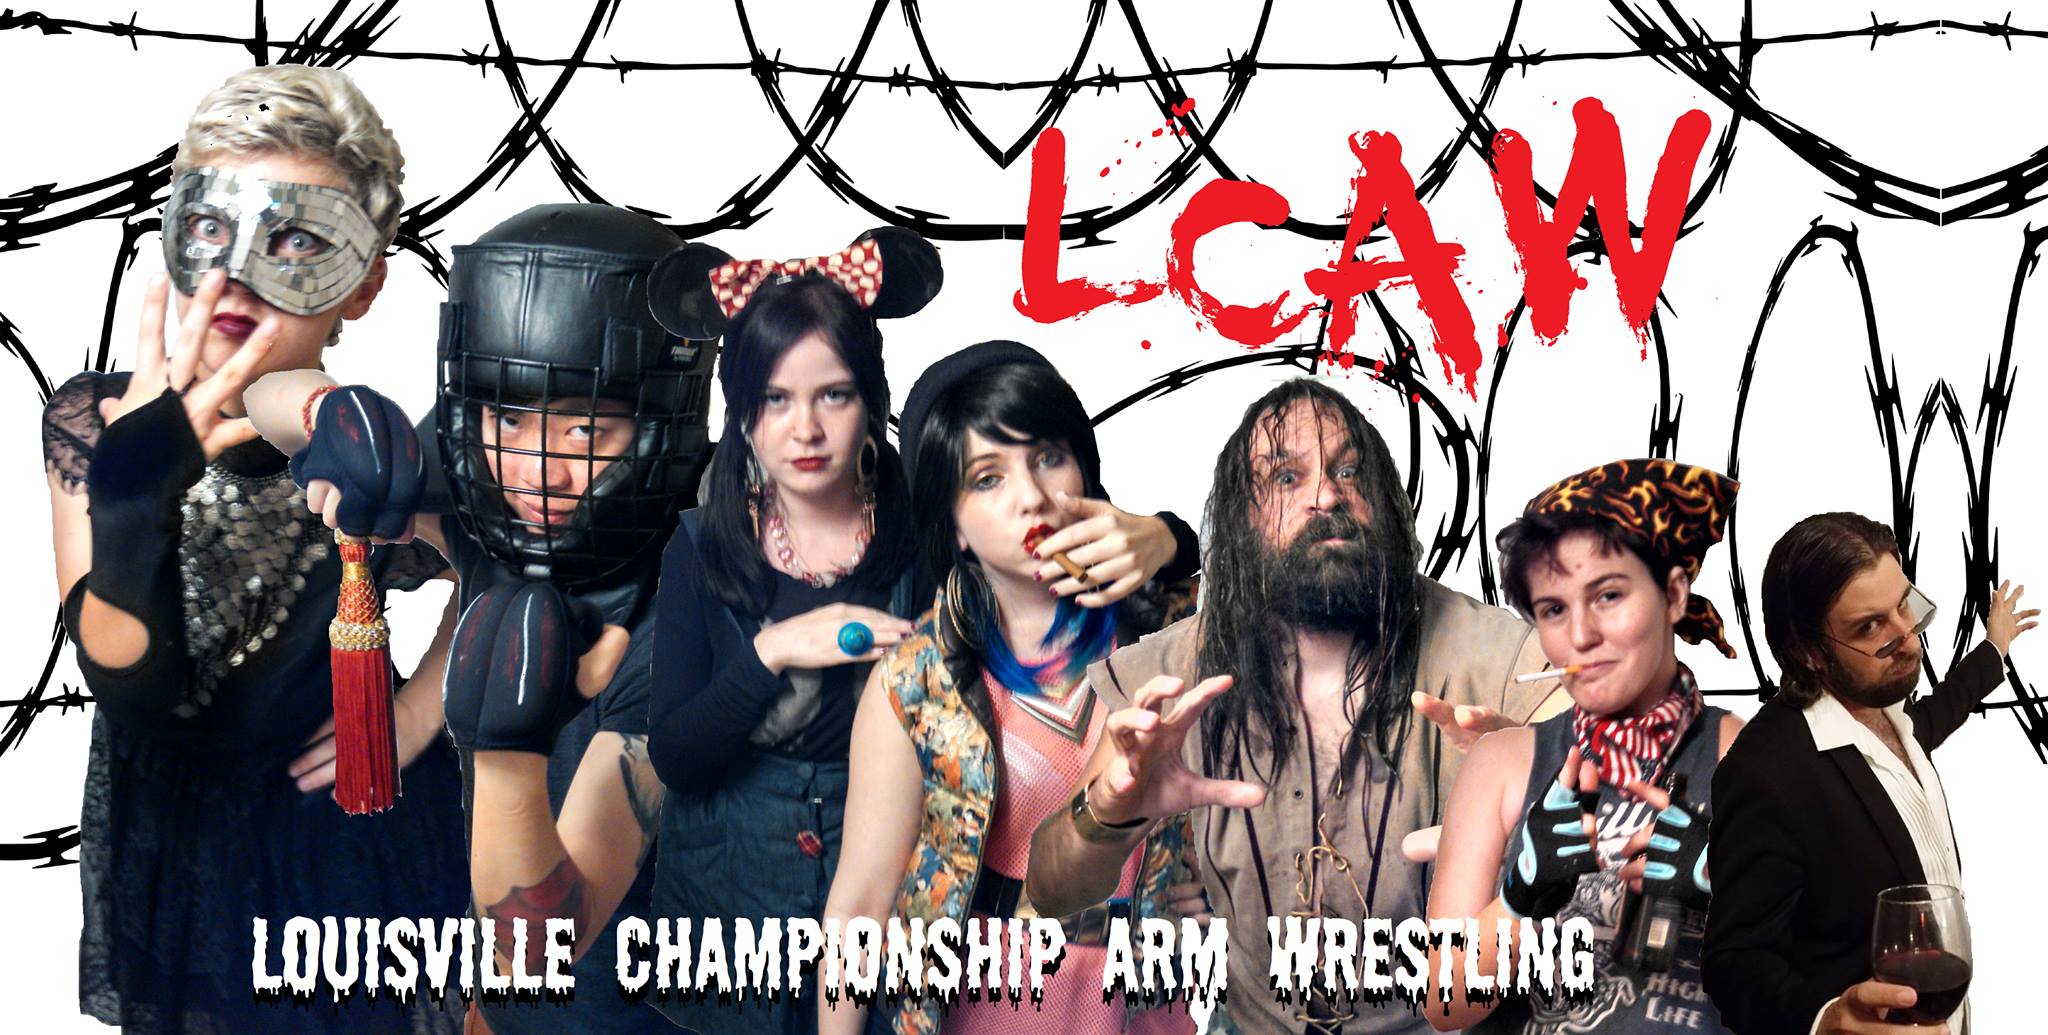 Is Louisville Ready For The Extreme Action of LCAW?